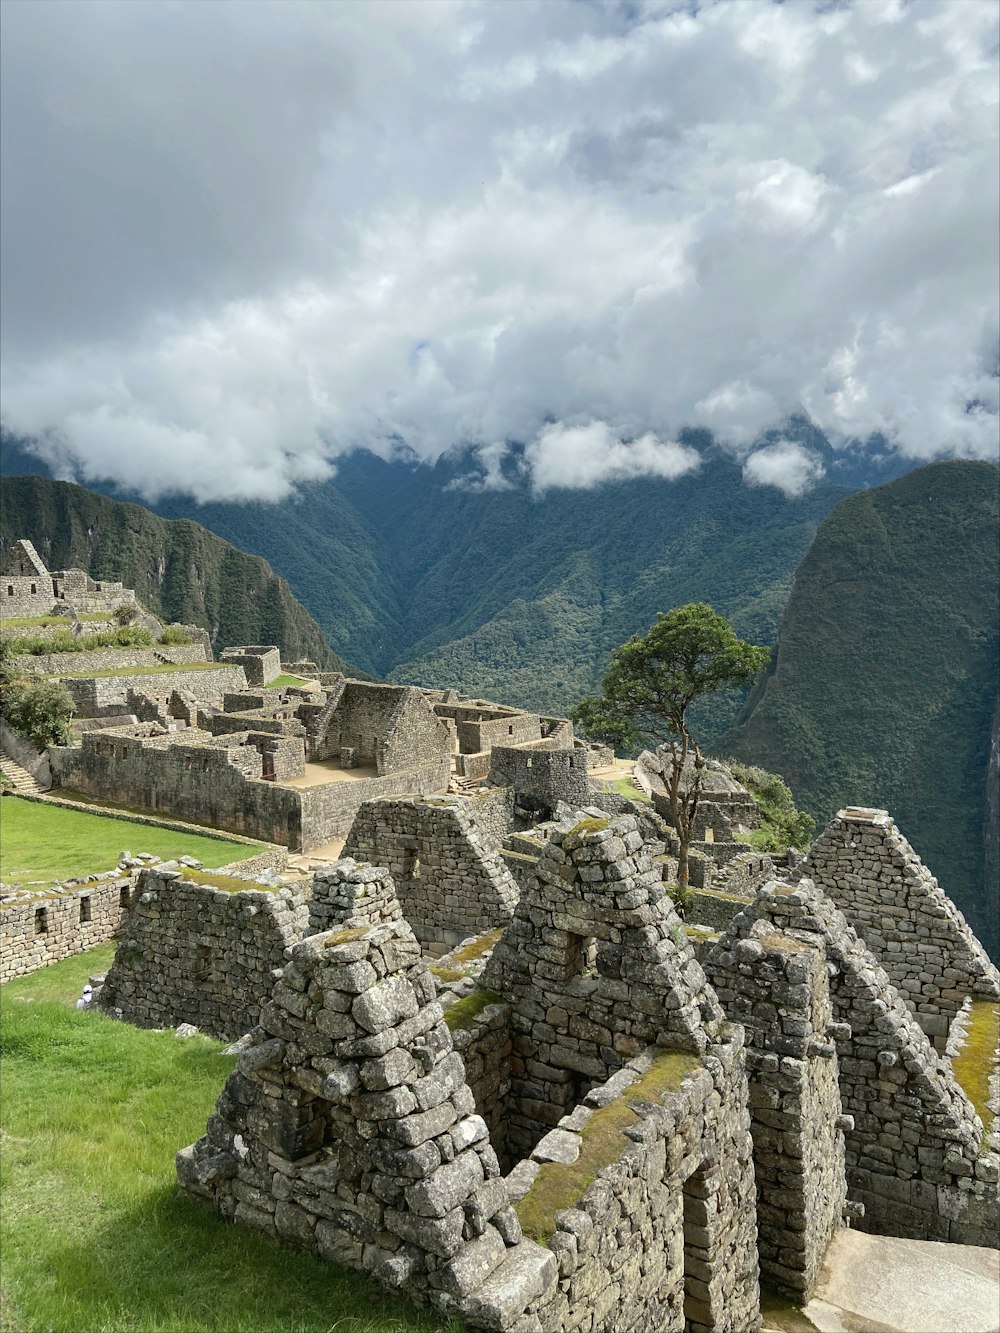 a view of a mountain range with ruins in the foreground